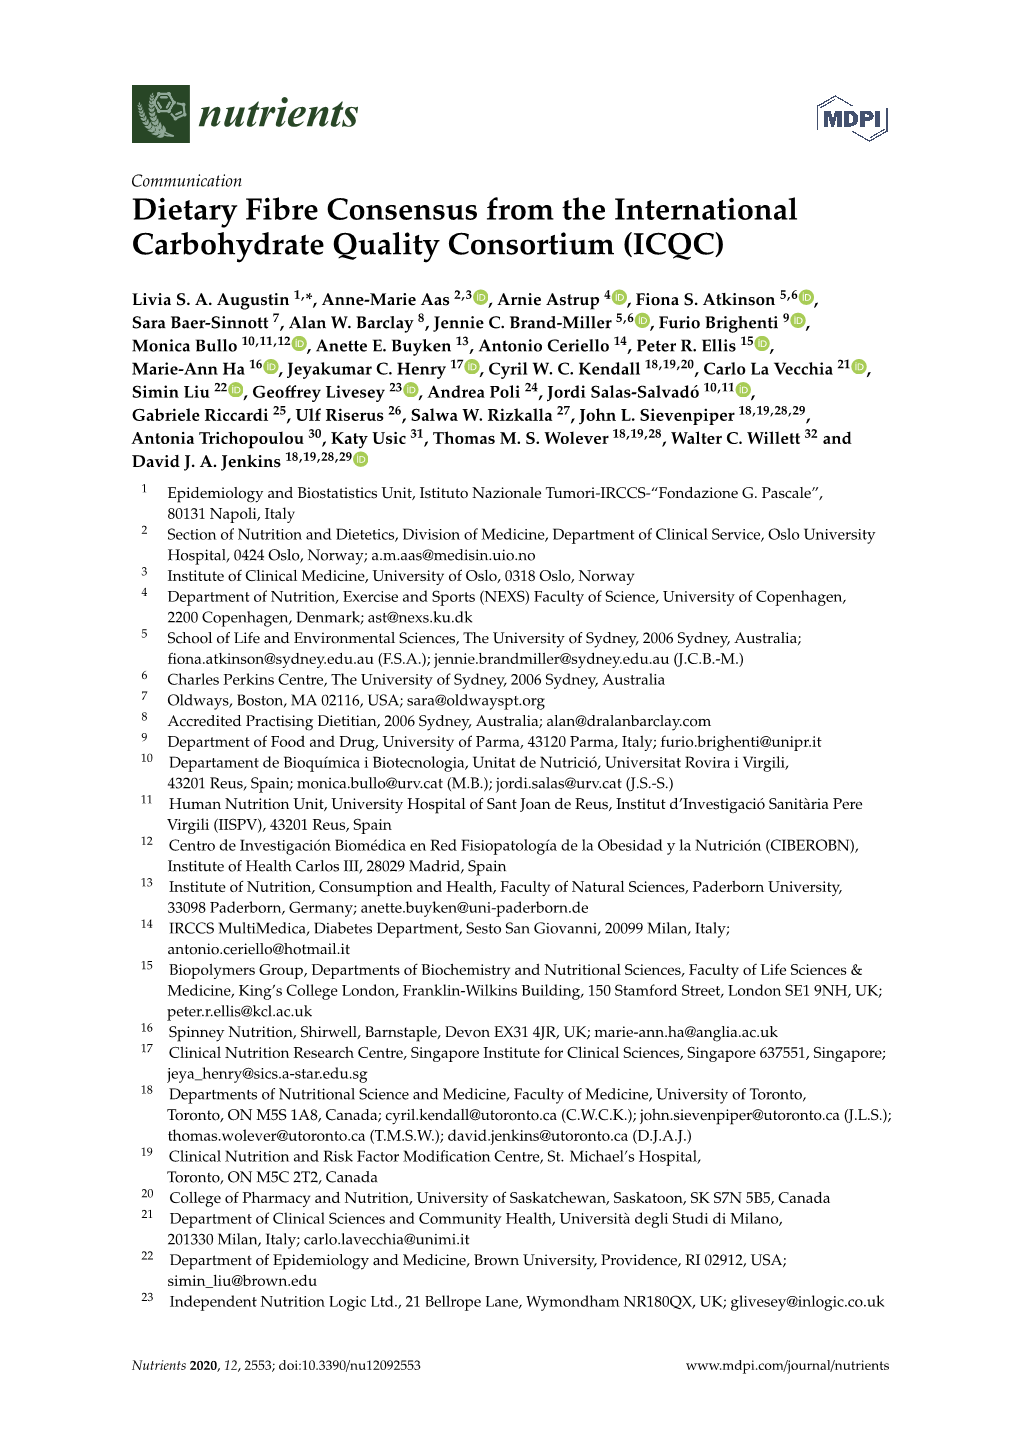 Dietary Fibre Consensus from the International Carbohydrate Quality Consortium (ICQC)